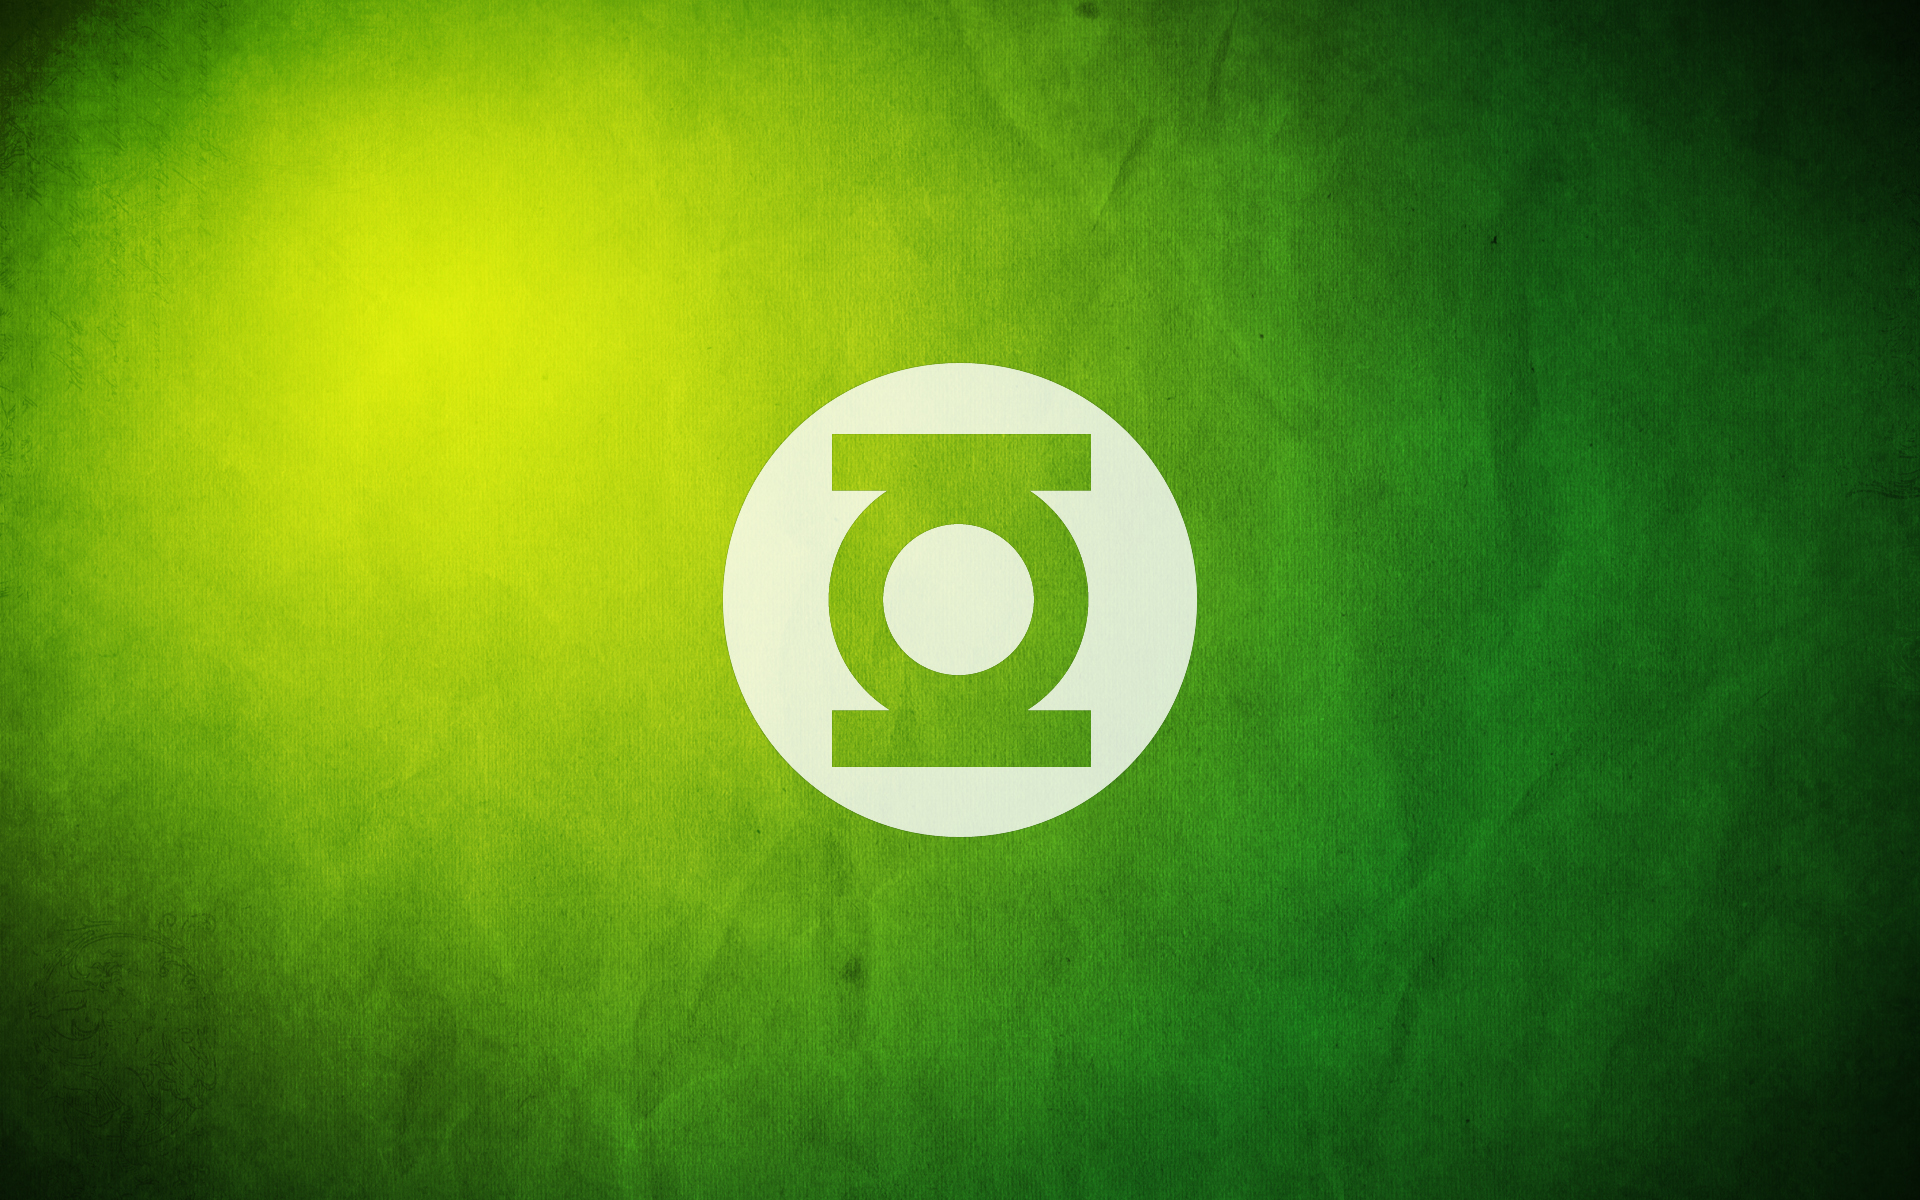 Check This Out Our New Green Lantern Wallpaper Dc Ics